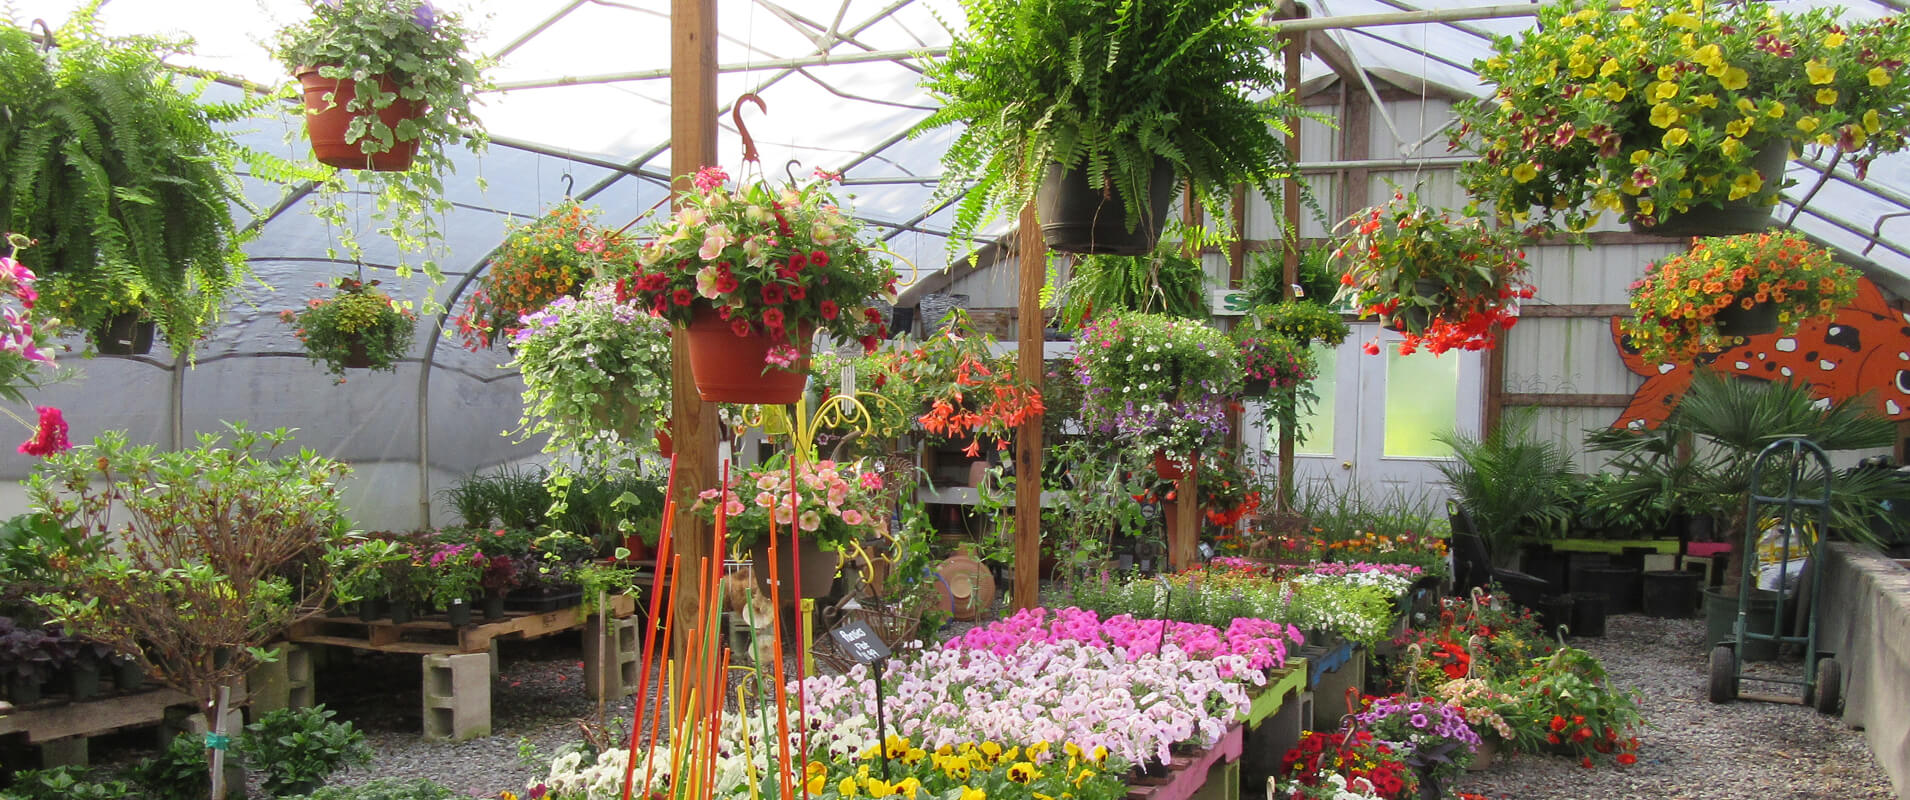 Visit our Greenhouse